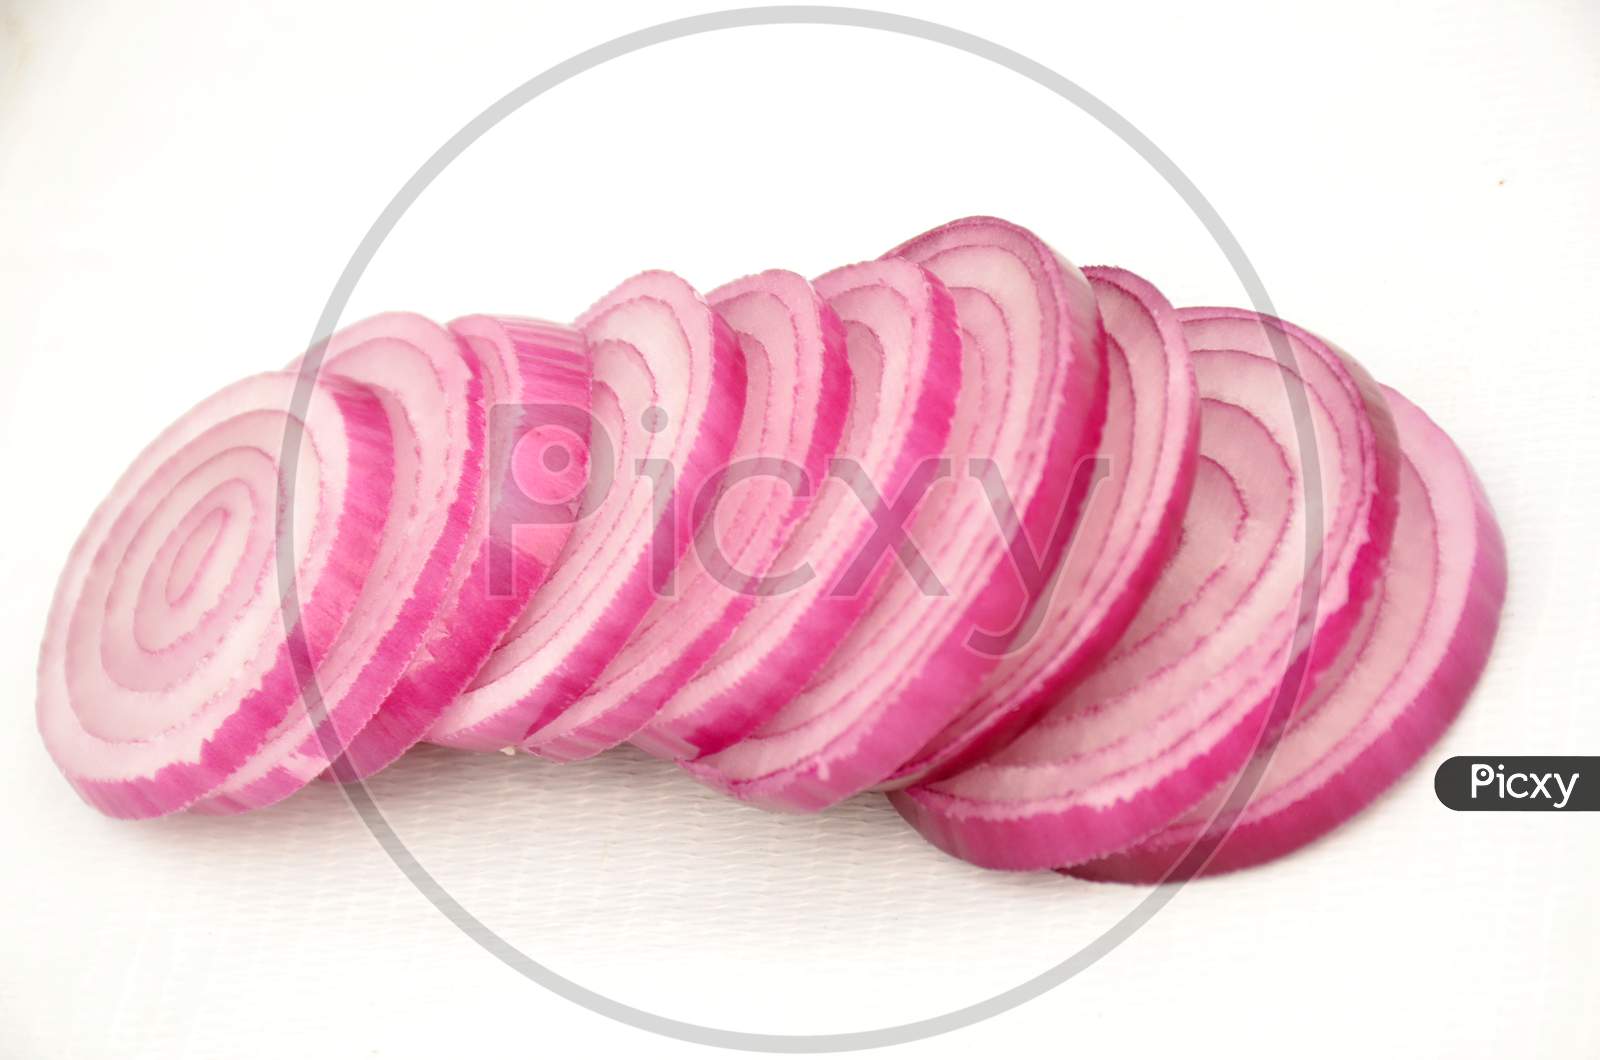 sliced pink white onion isolated on white background